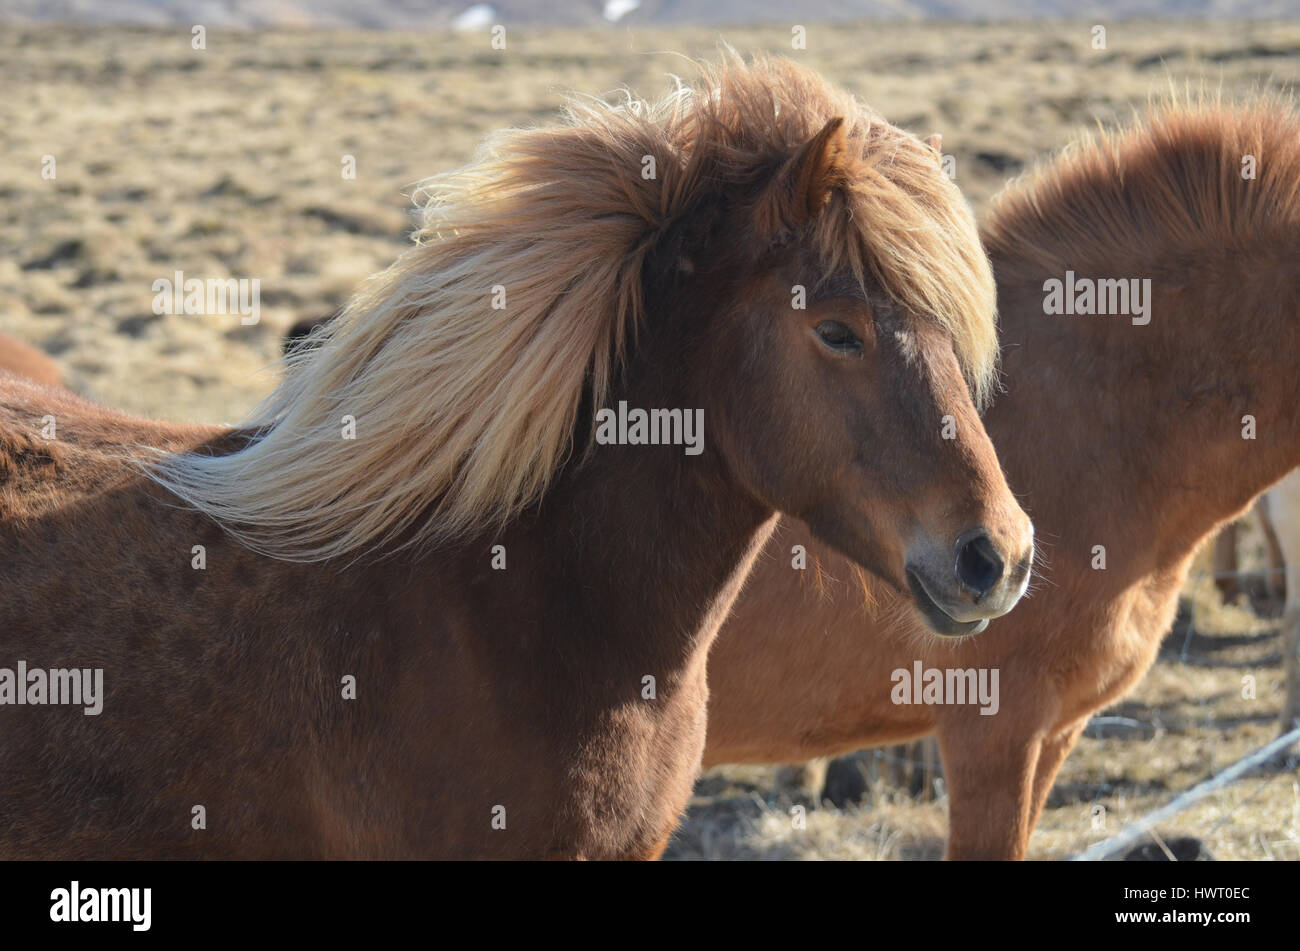 Gorgeous Icelandic horse standing at the fence line. Stock Photo